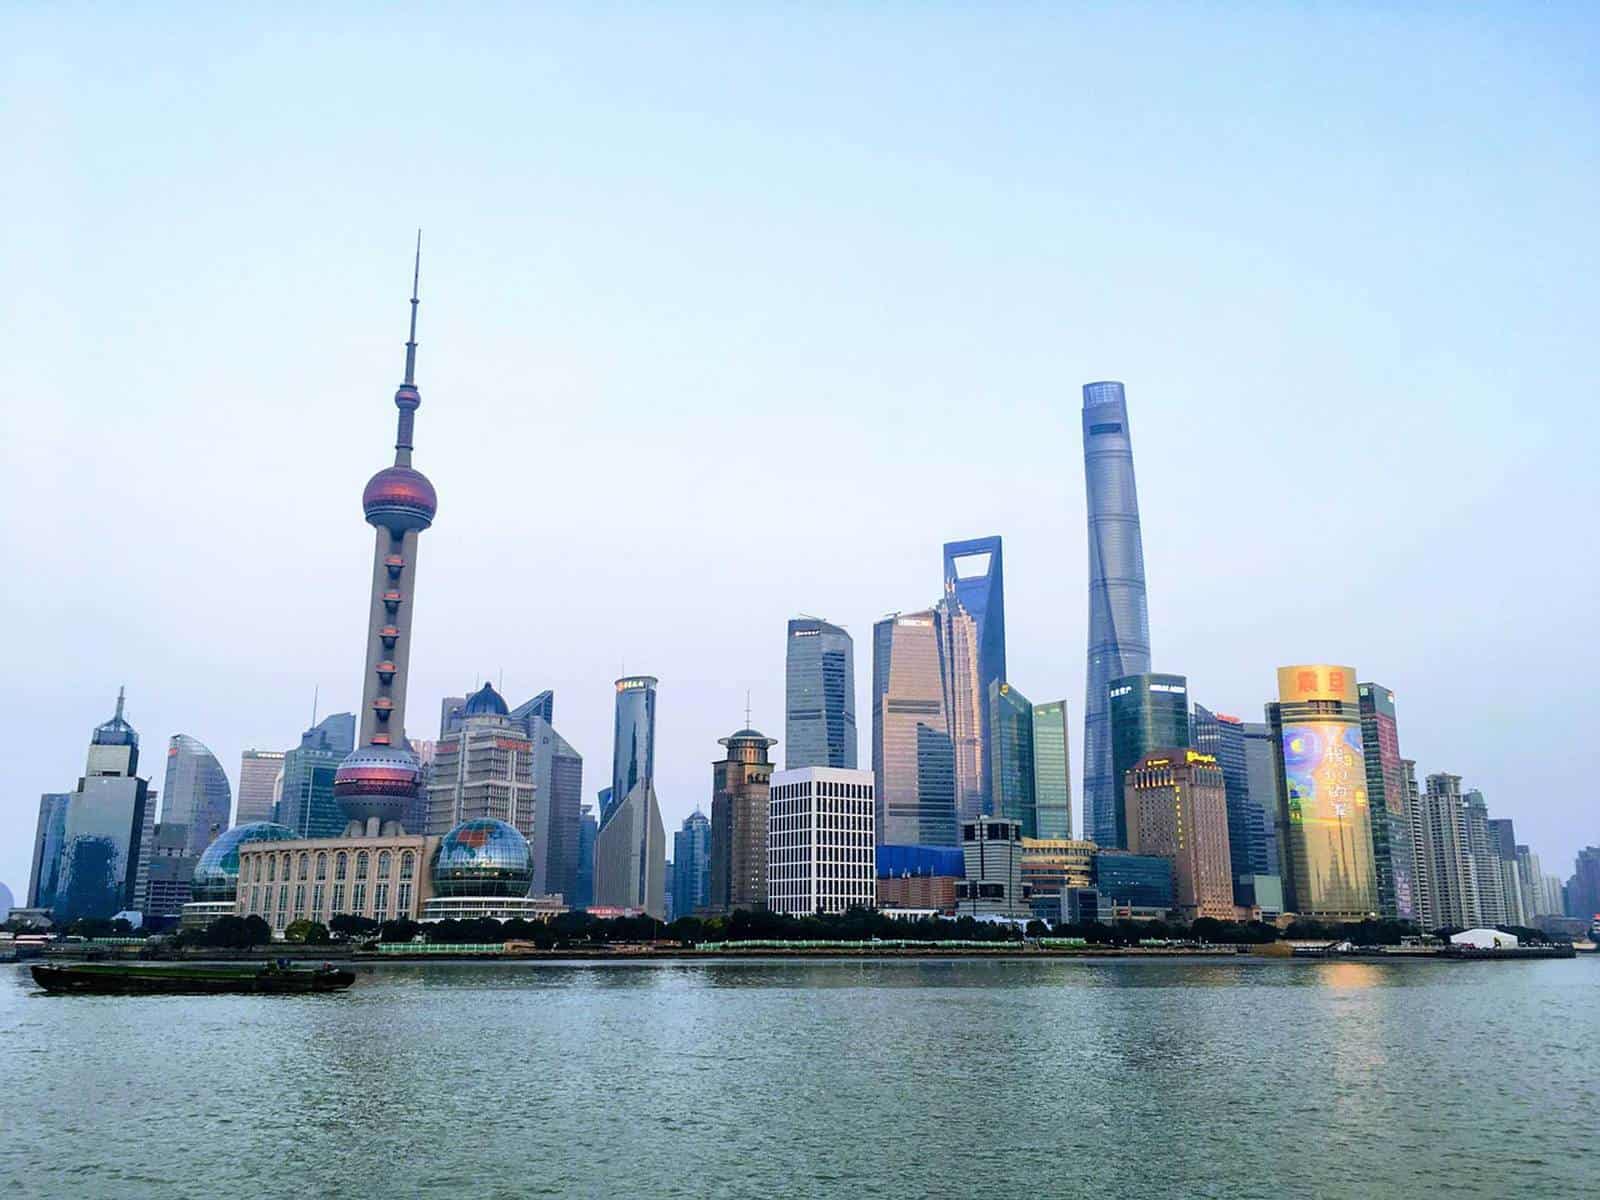 Bund is a must see during your 4 days in Shanghai.